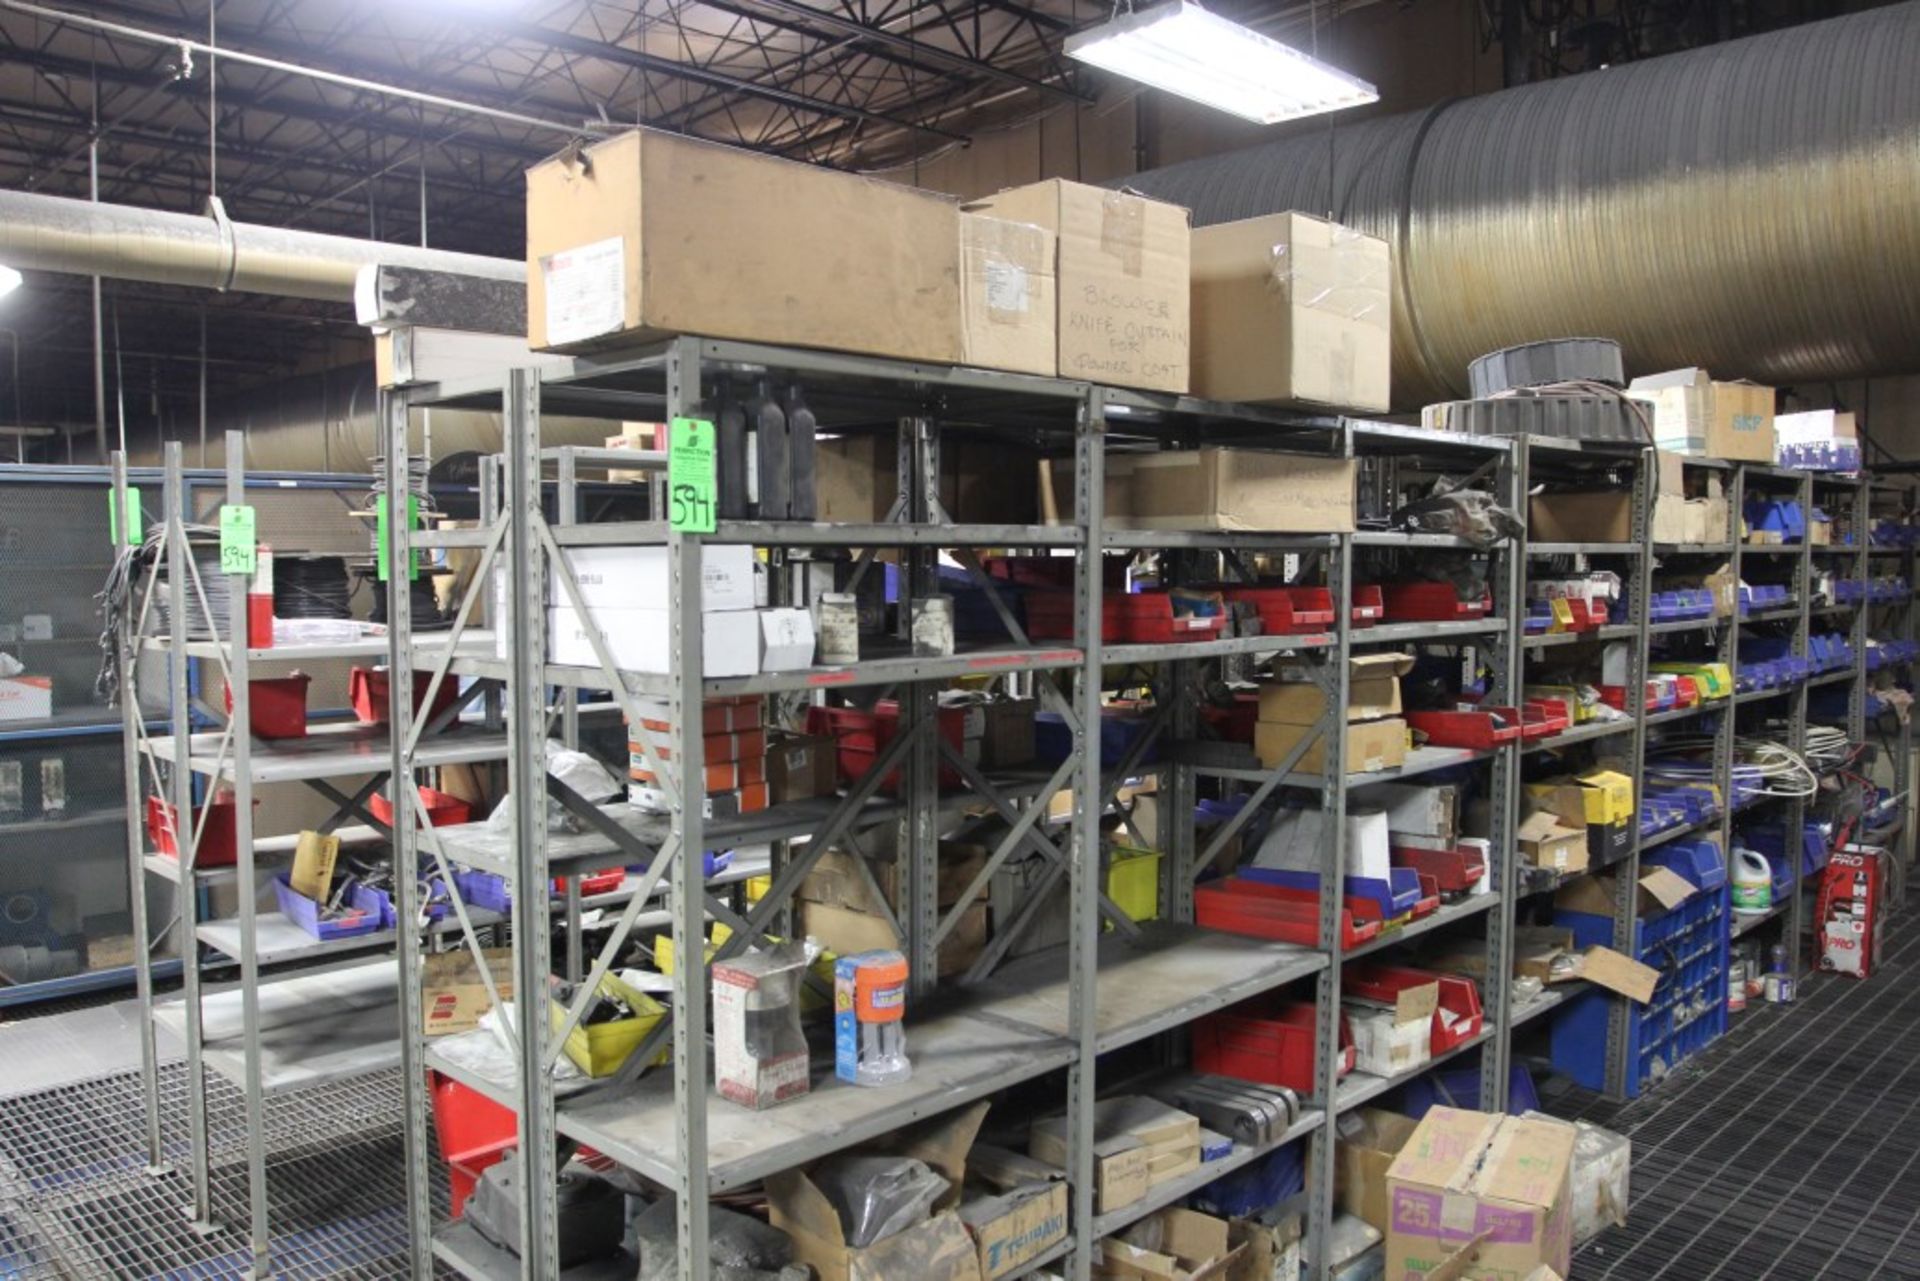 Maintenance Area Comprising (5) Rows of Shelving Units and Contents